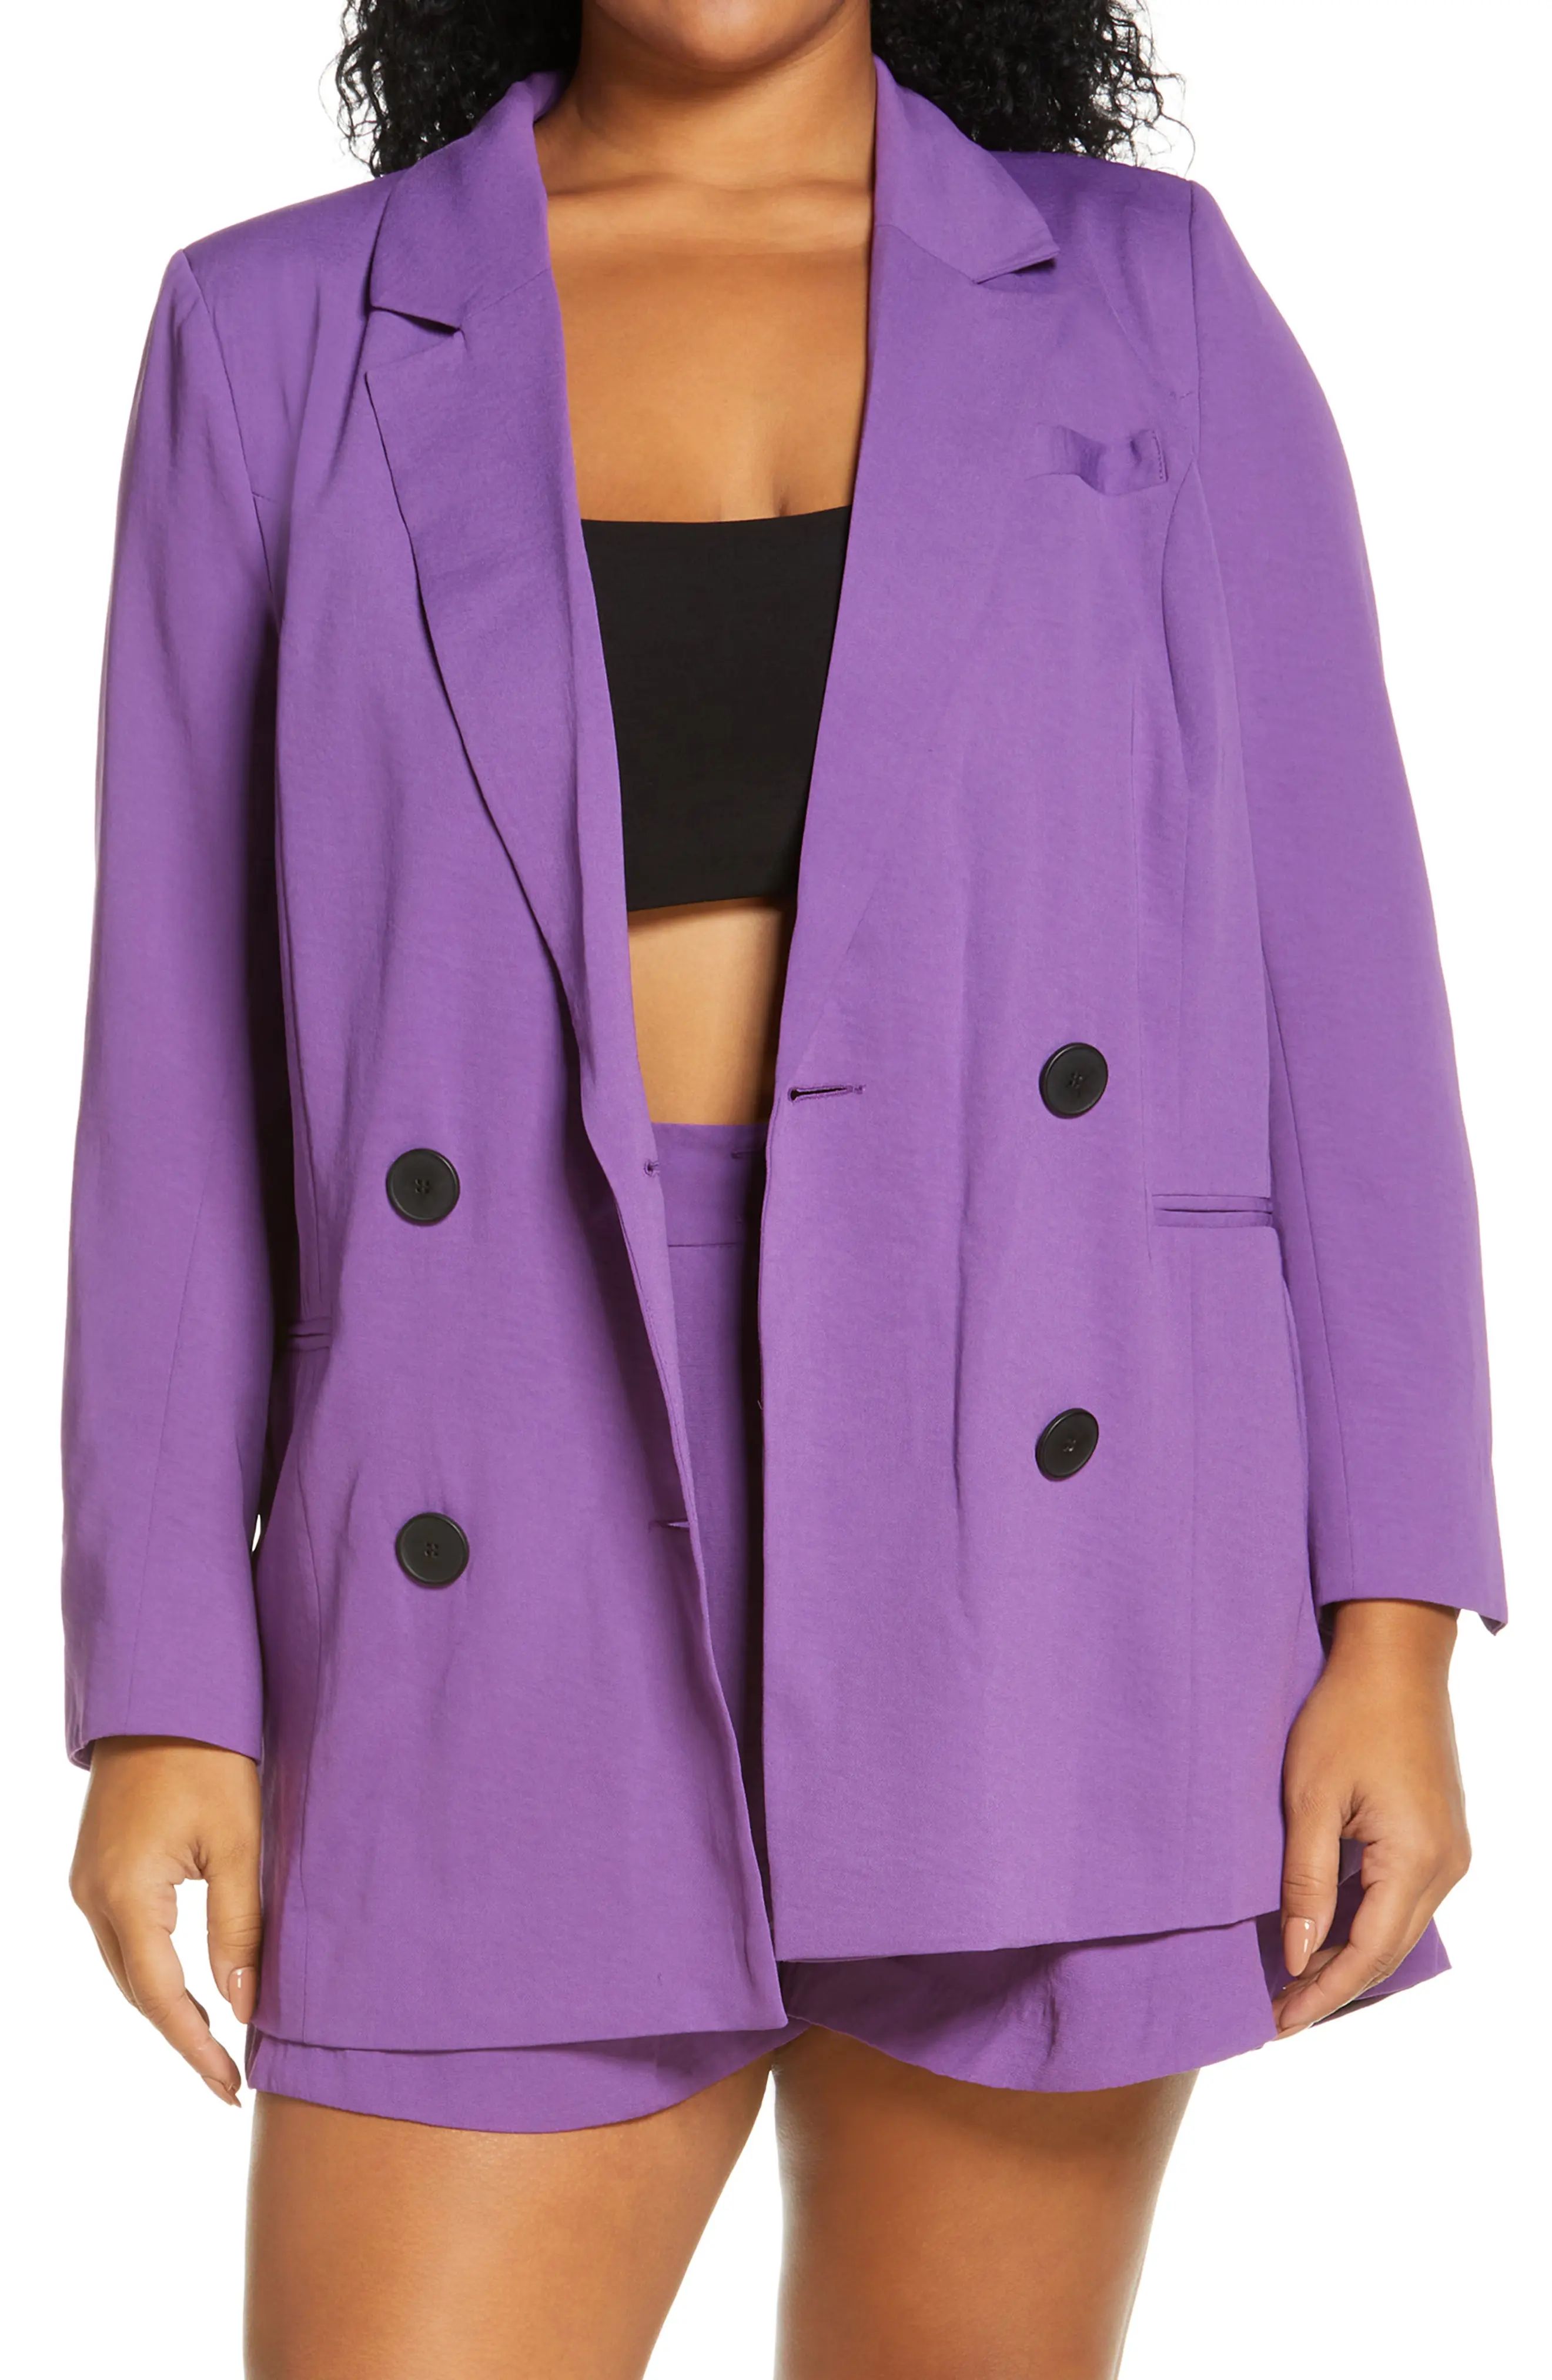 River Island Structured Double Breasted Blazer, Size 22 Us in Medium Purple at Nordstrom | Nordstrom